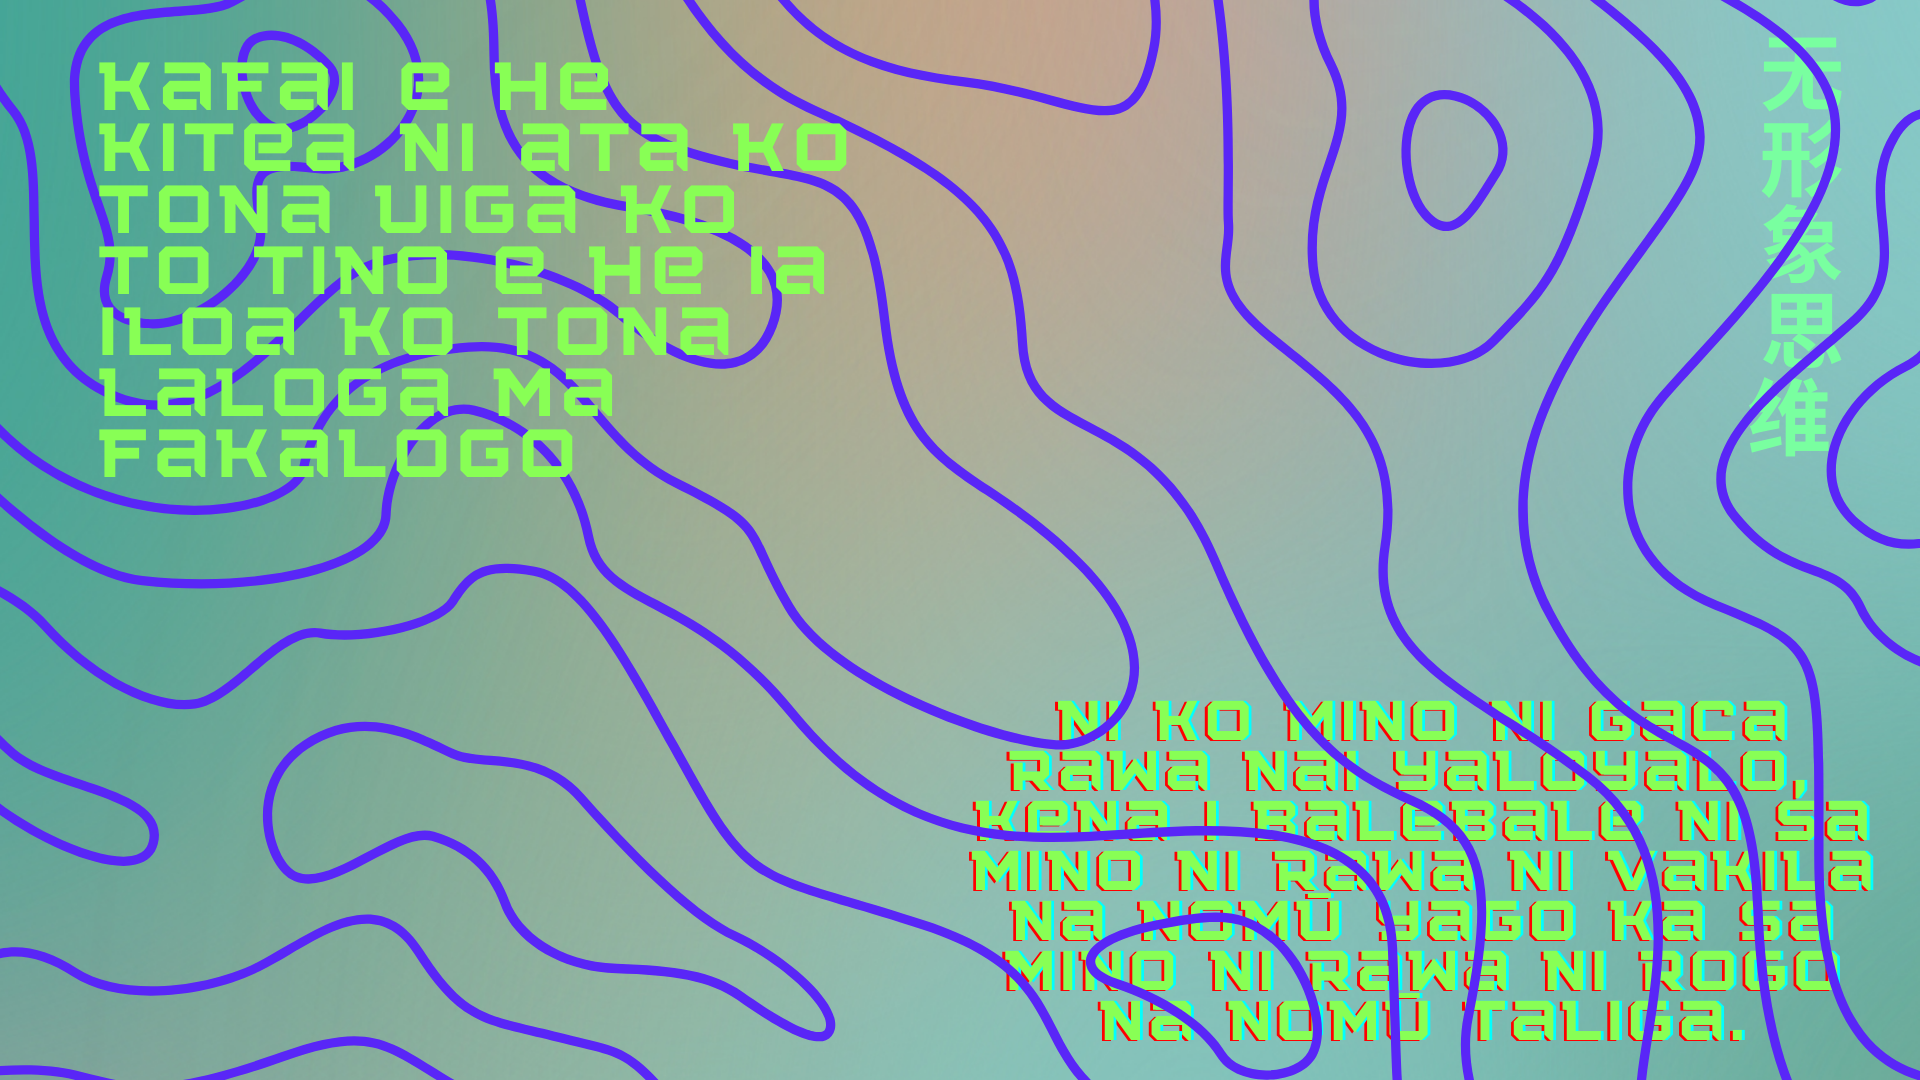 A blue-green and orange background to bright blue contour lines showing the text of the project title in Gagana Tokelau, Vosa vakaviti and Cantonese